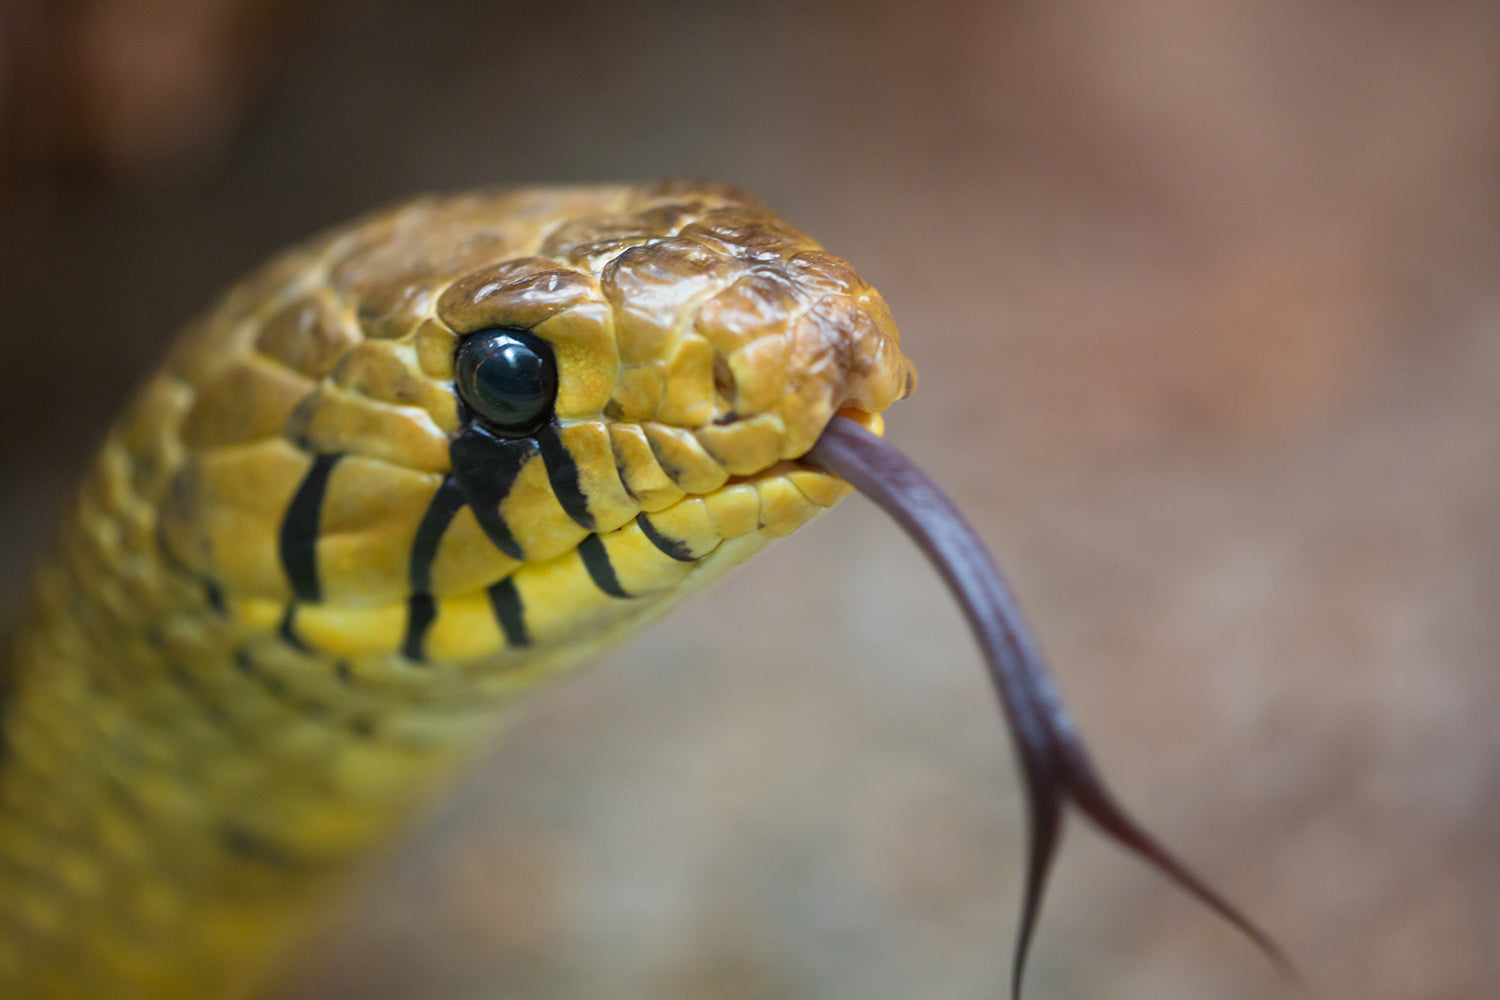 10 Myths About Python Snakes Debunked Once and for All